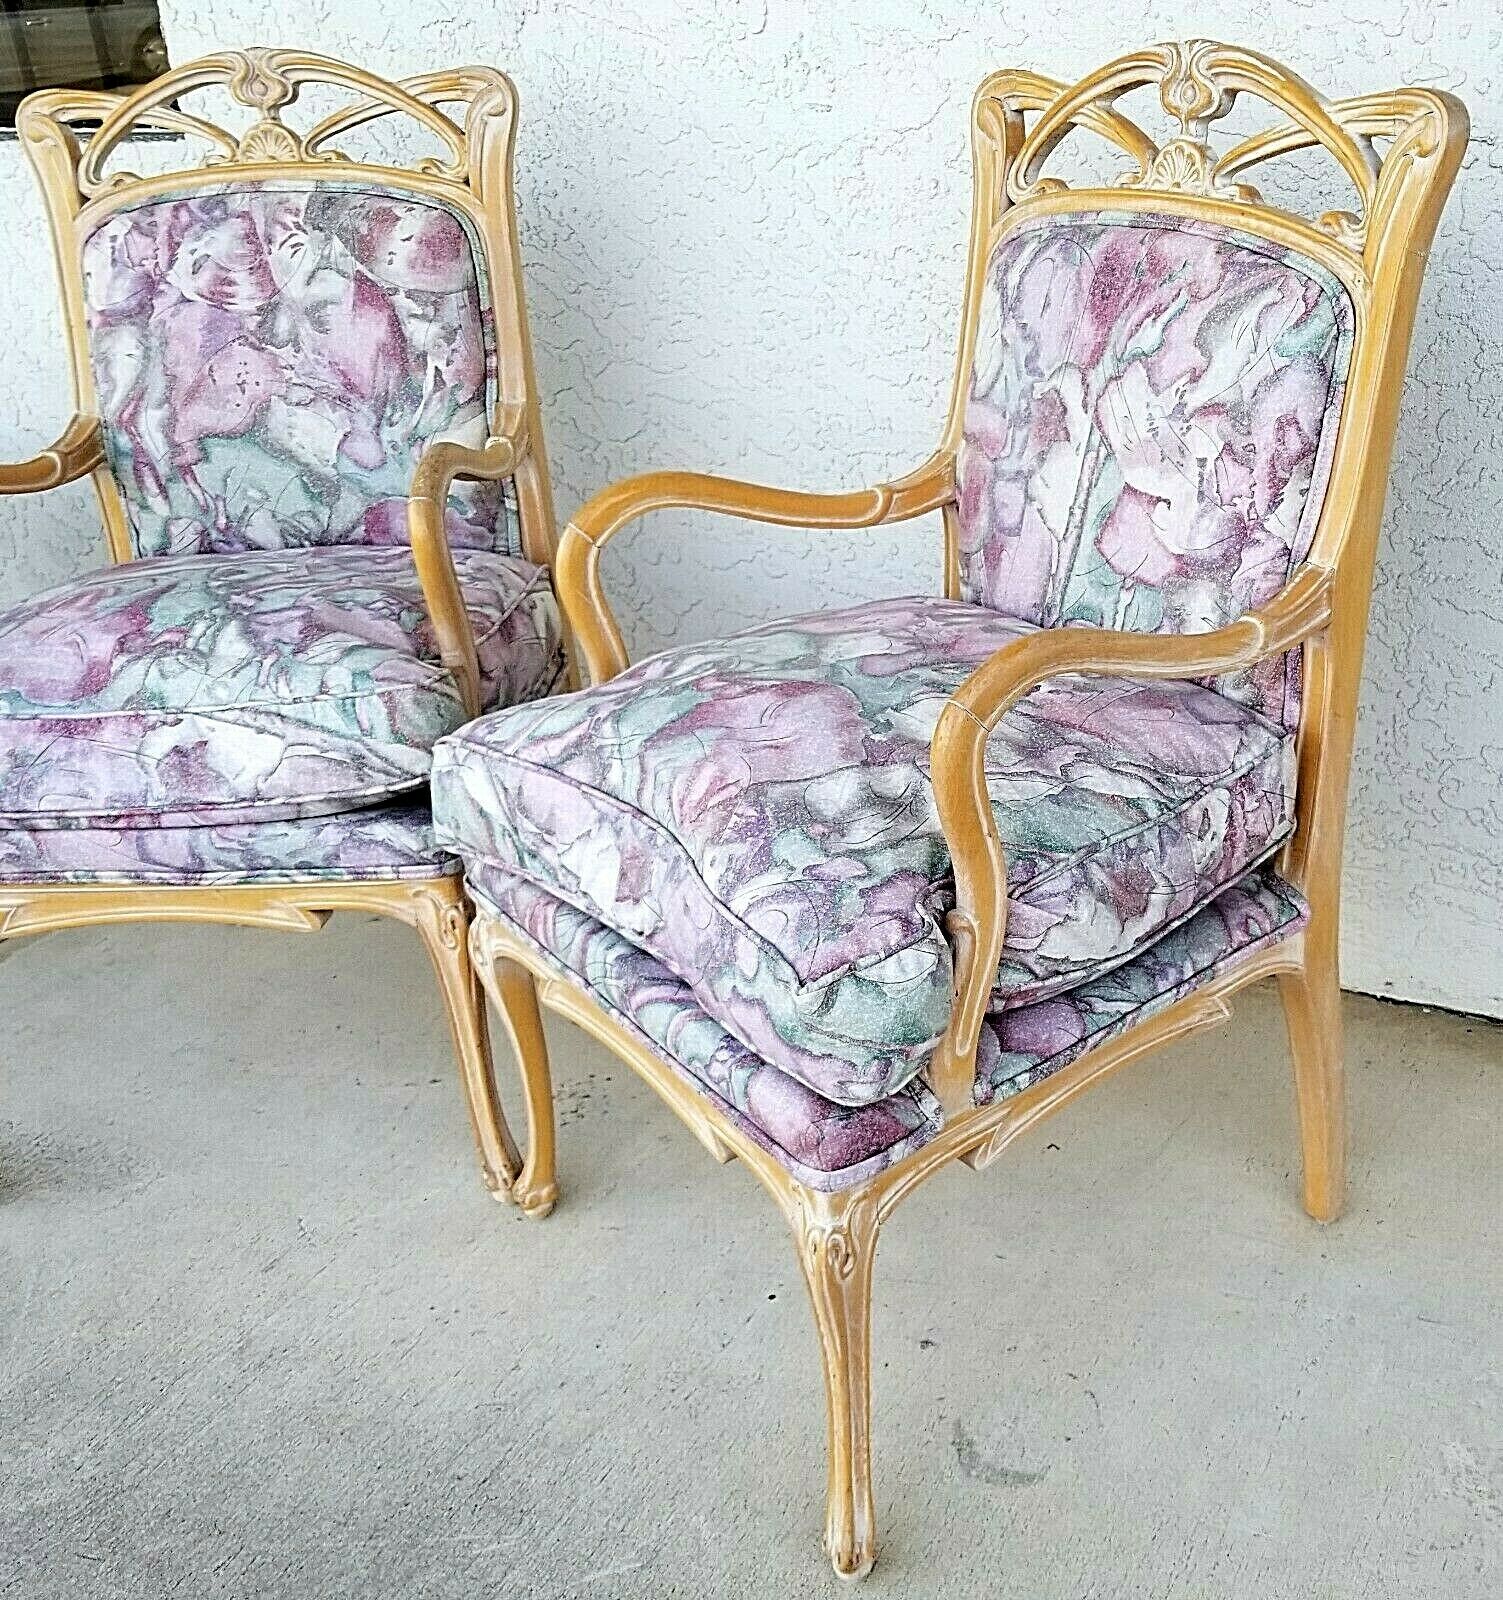 Offering one of our recent Palm Beach home furnishings acquisition of a 
Pair of French Provincial Fauteuil carved wood upholstered accent chairs armchairs
With very comfortable foam and down cushions for maximum comfort without